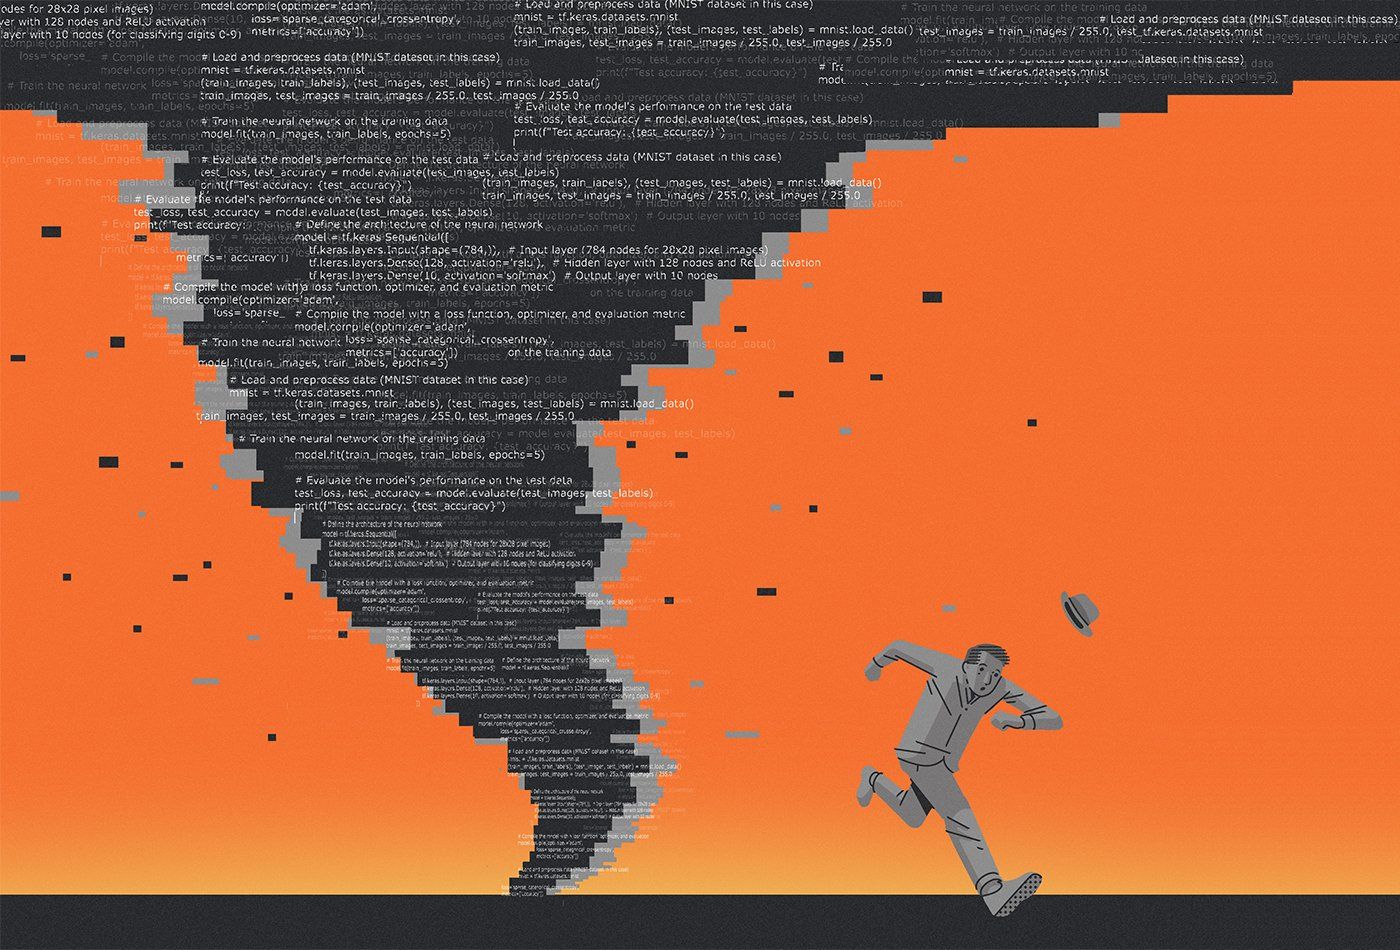 An illustration of a person running away from a tornado shape full of code